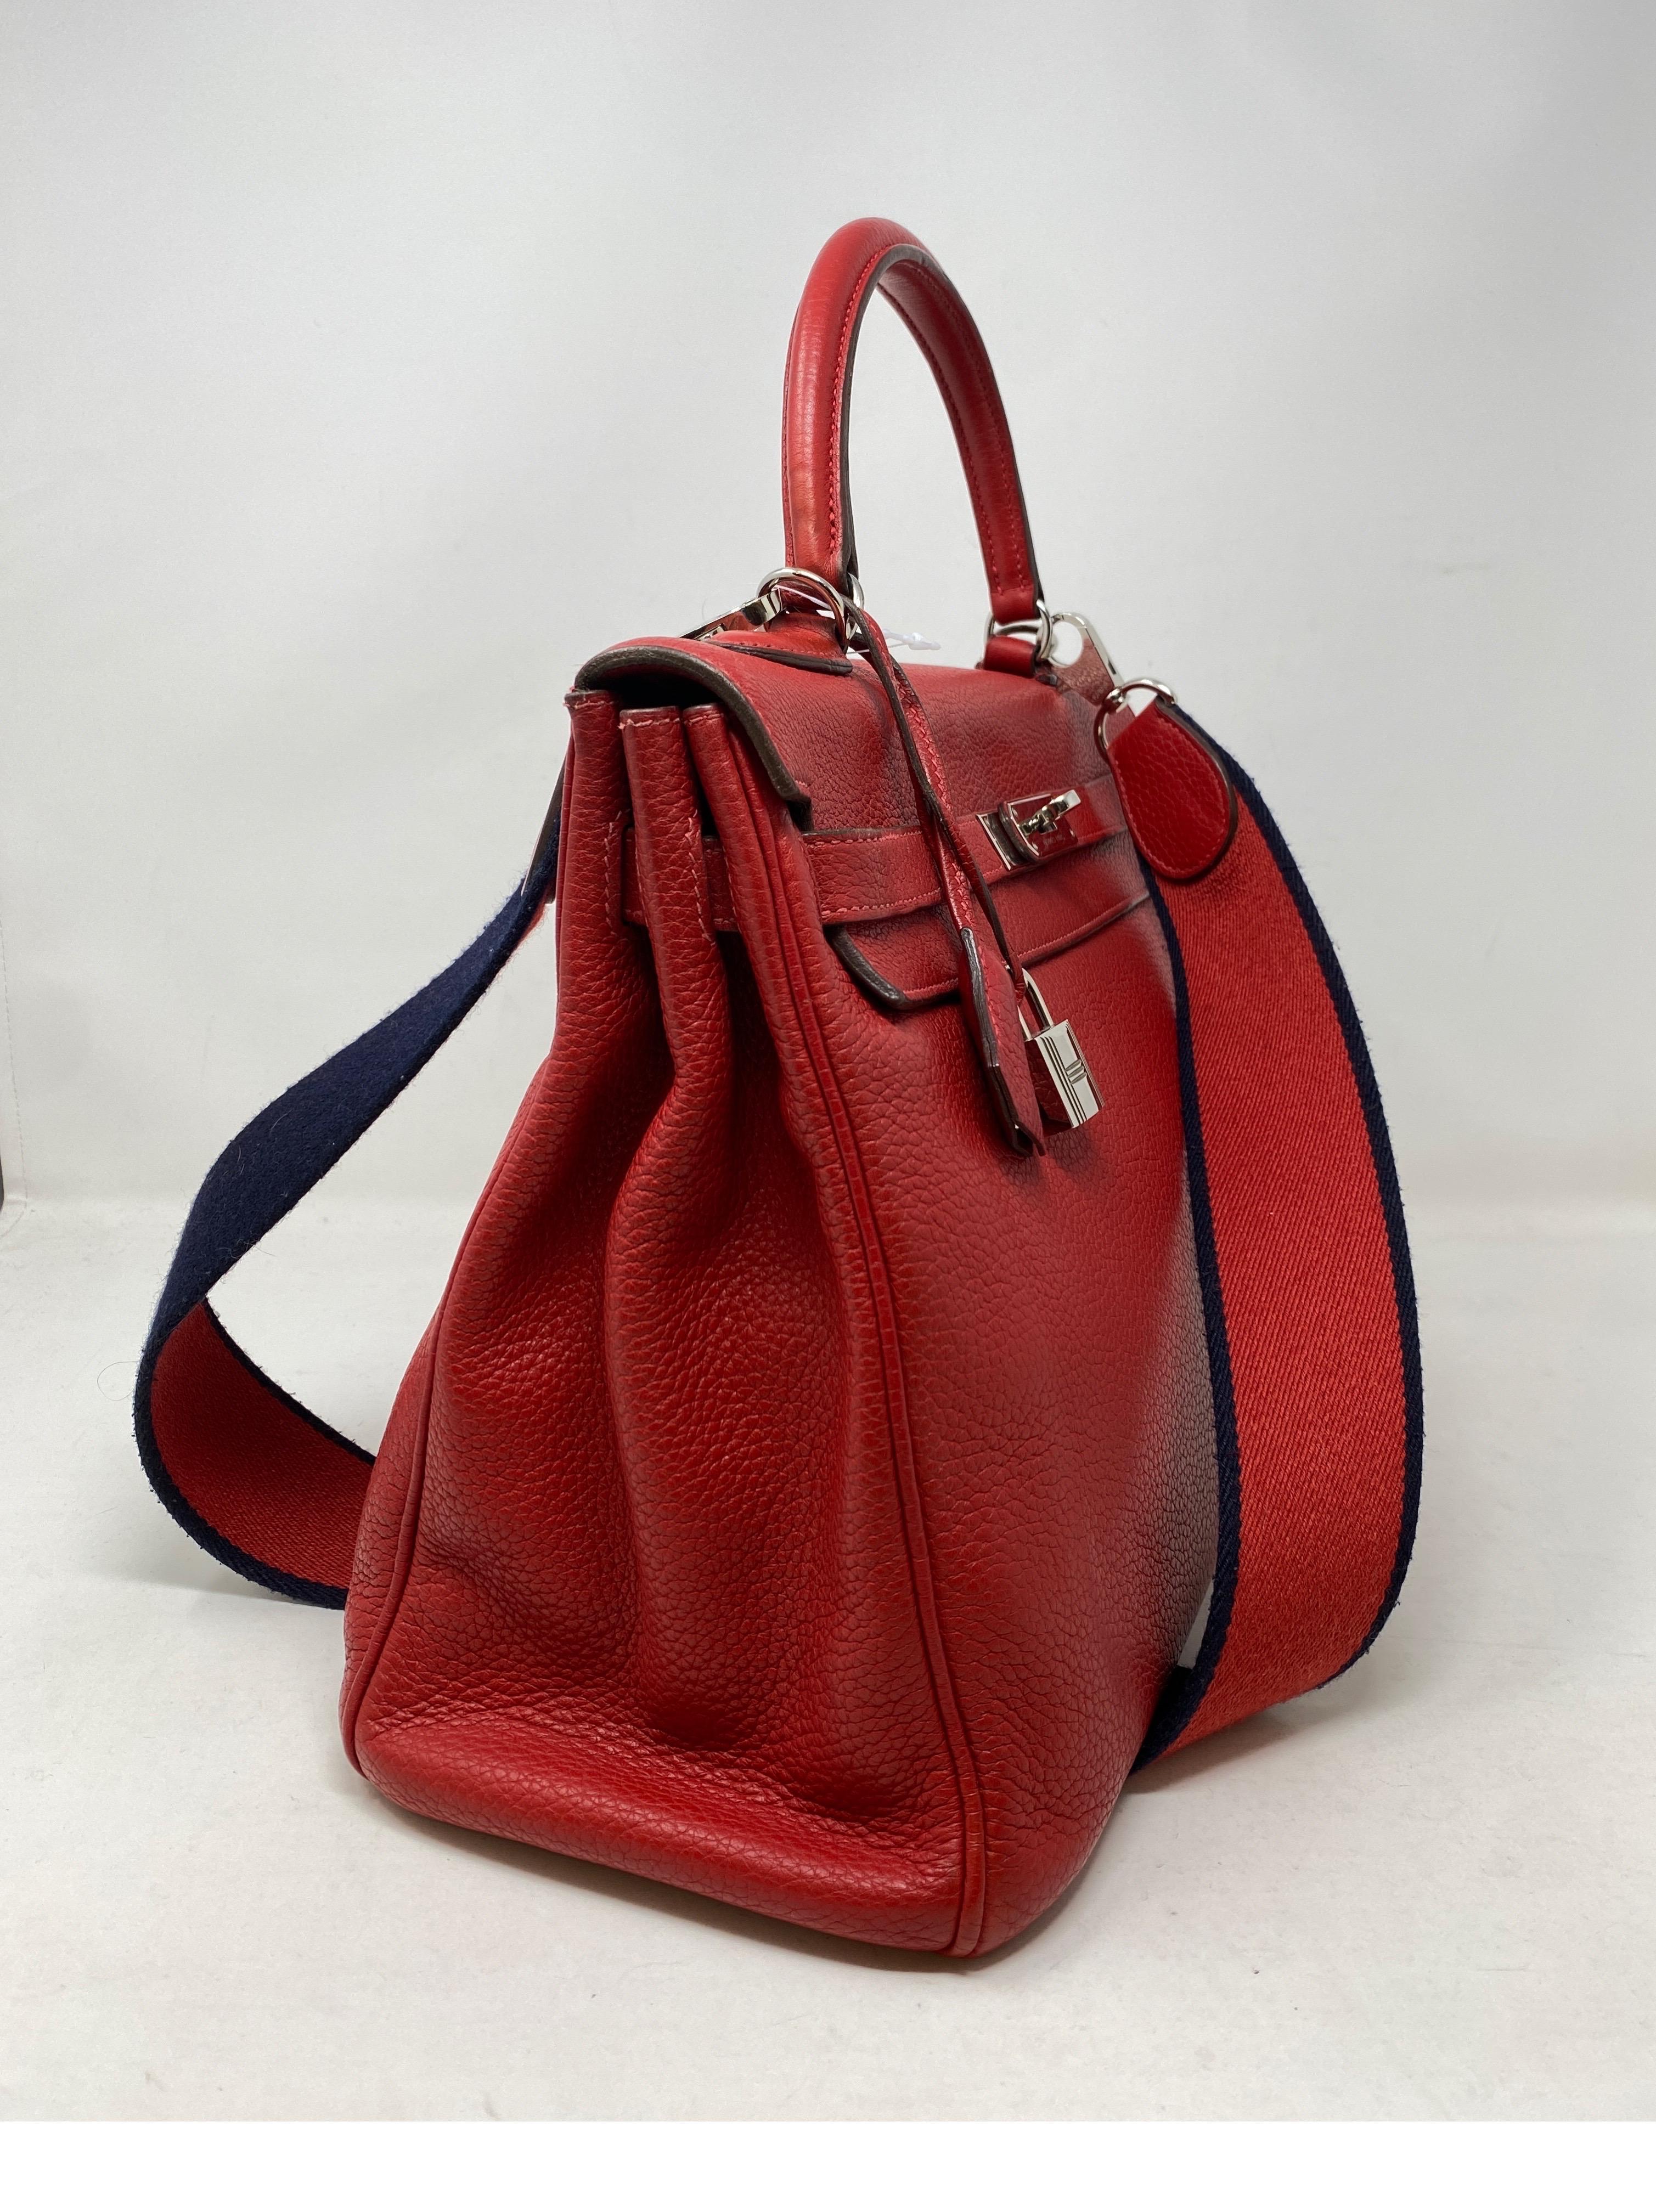 Hermes Red Kelly 35 Bag. Navy and red canvas strap. Palladium hardware. Good condition. Comfortable strap. Can be worn as a shoulder bag or top handle. Includes lock, keys, clochette, and dust cover. Guaranteed authentic. 